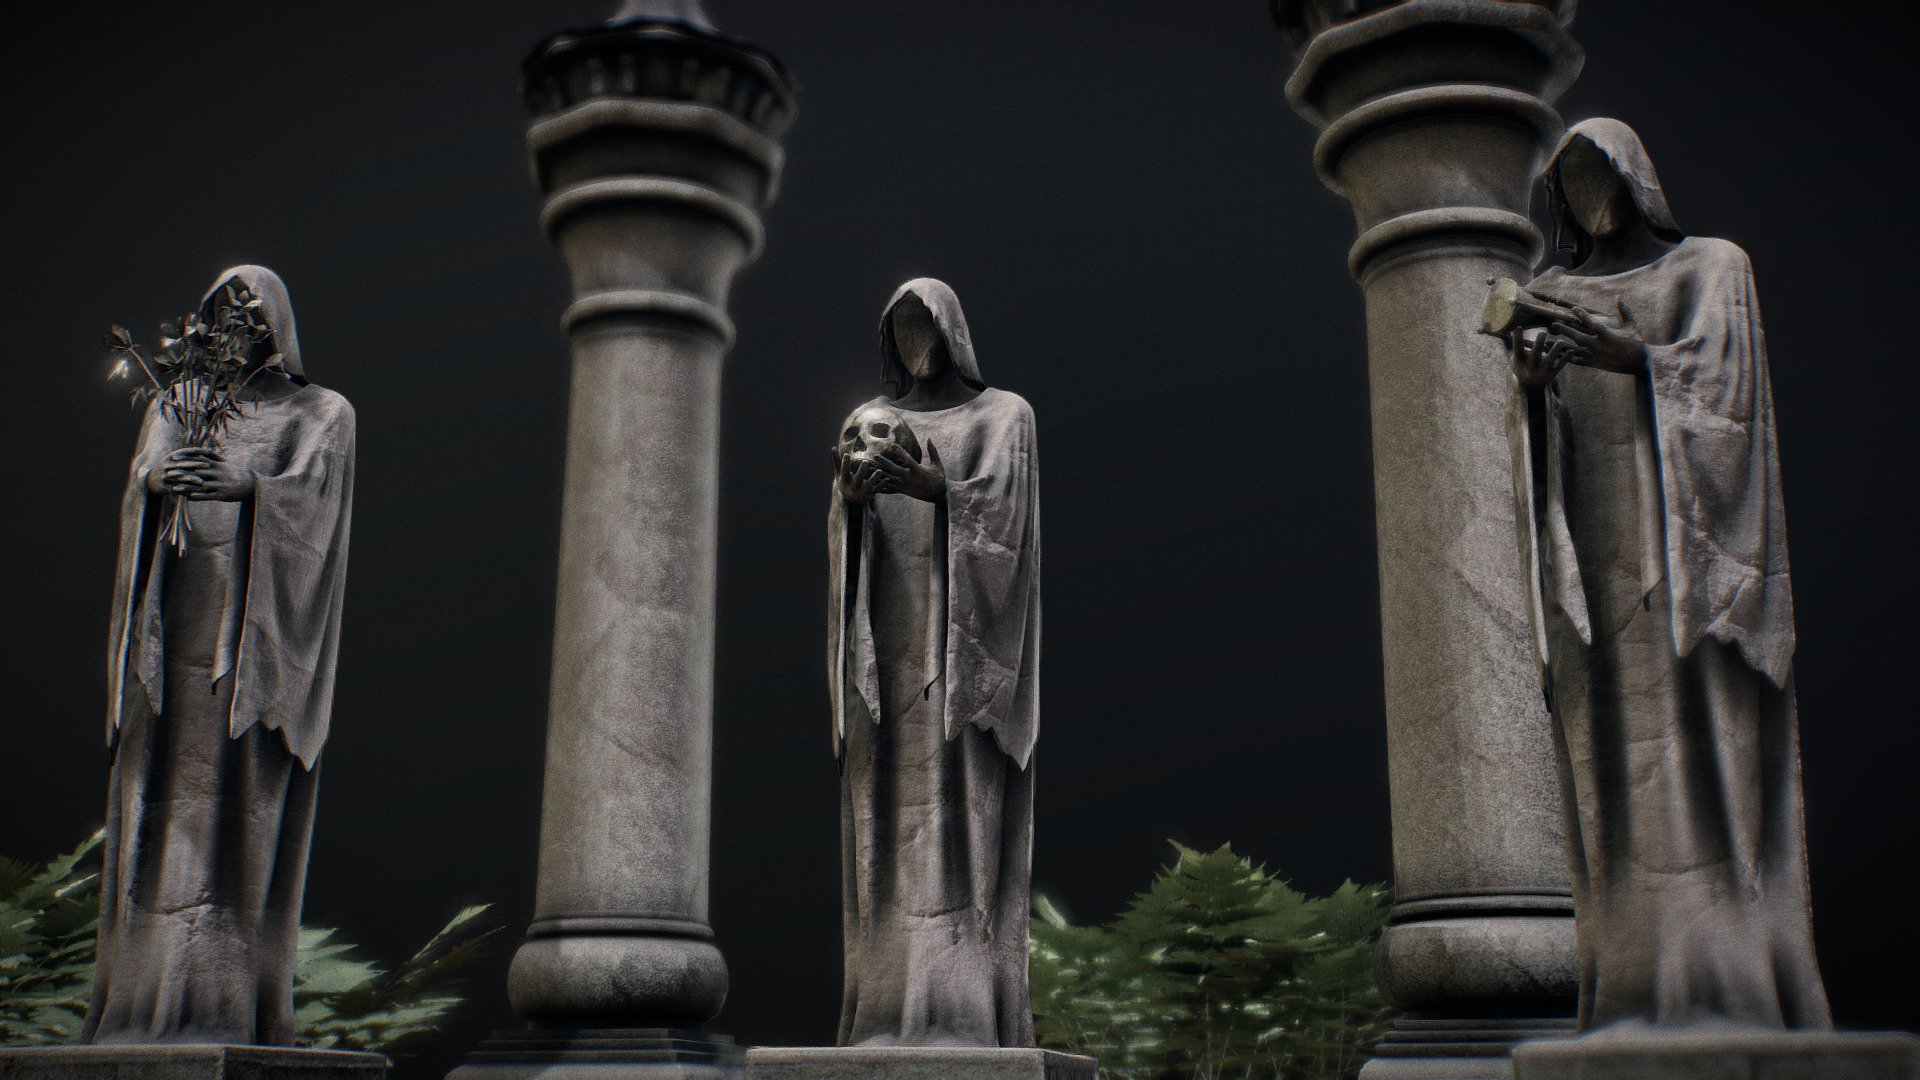 3 ancient statues modeled in blender with some fun cloth sim. the statues and held object have a single shared 8K PBR material. same with the scene around it. the ferns and leaves have their own separate materials. all PBR 3d model